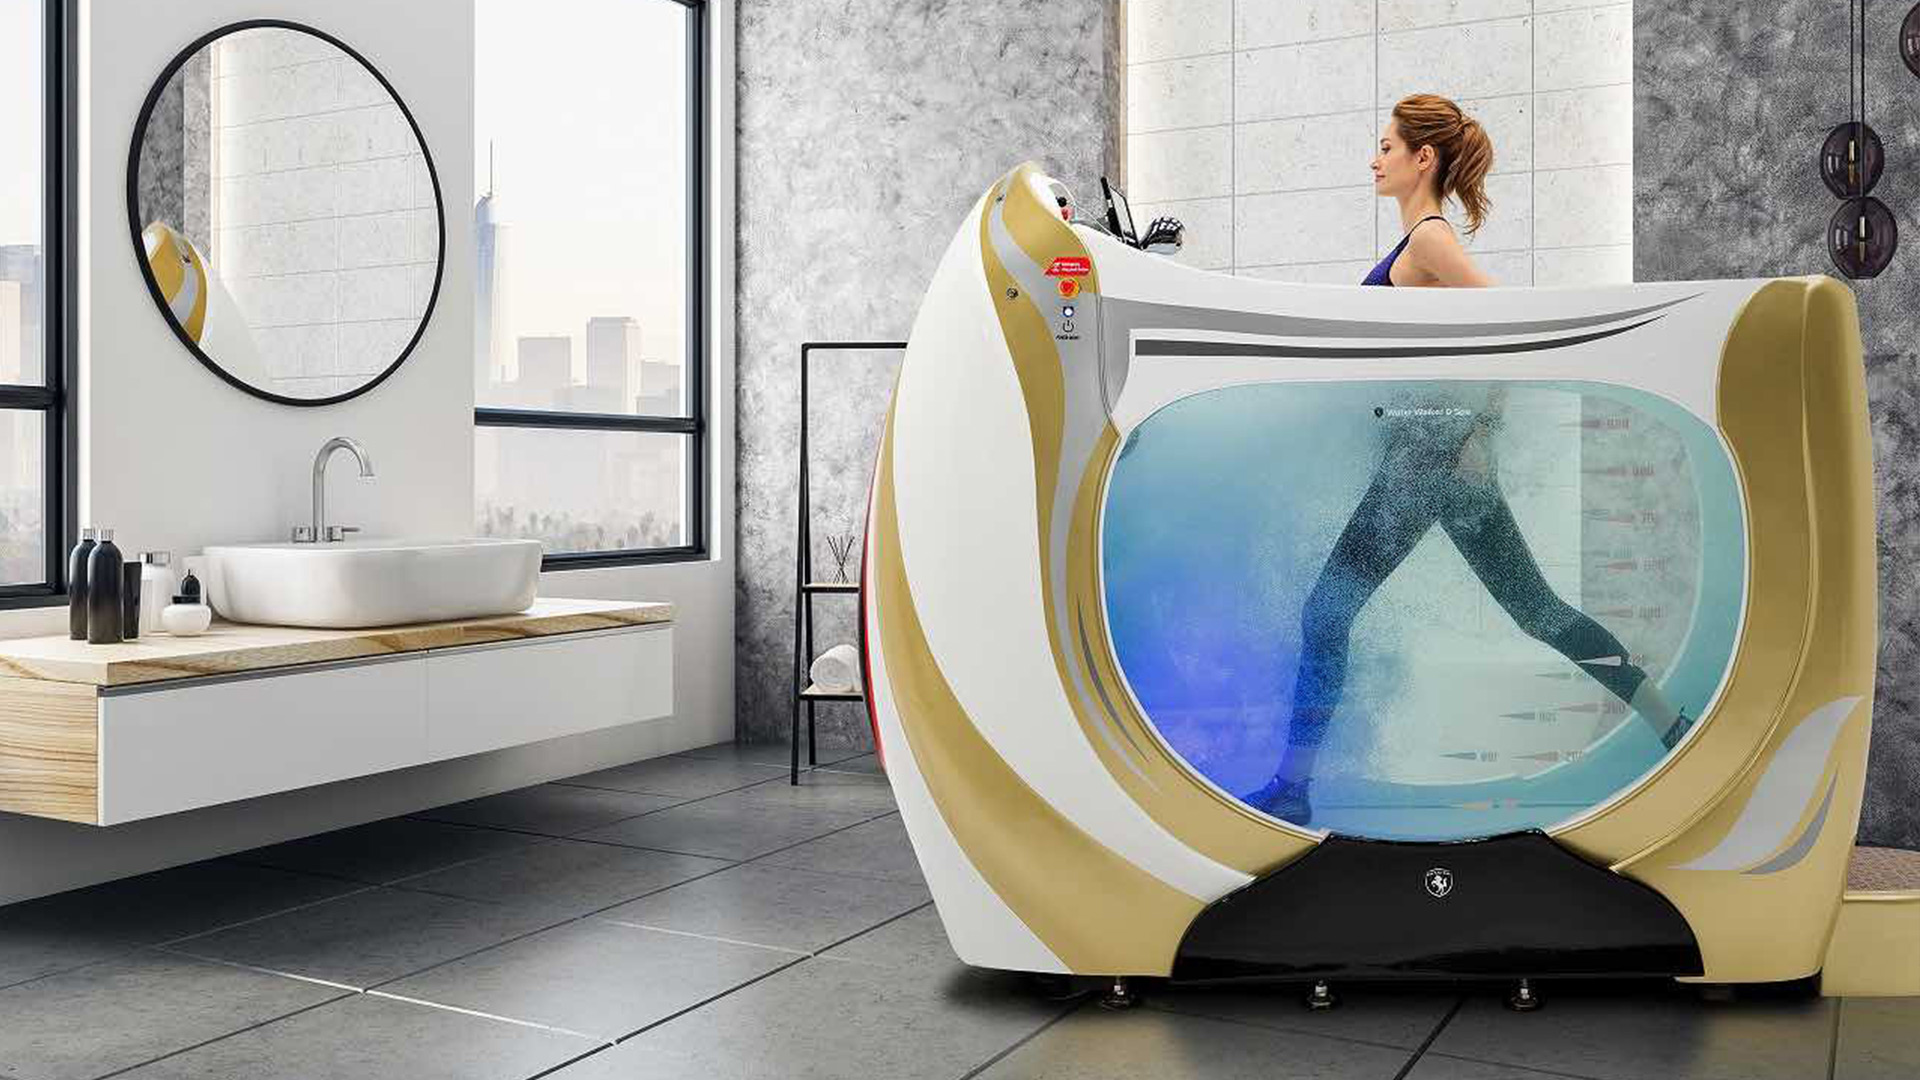 This Luxury Spa Doubles As A Treadmill, Never Leave The Bathroom Ever Again